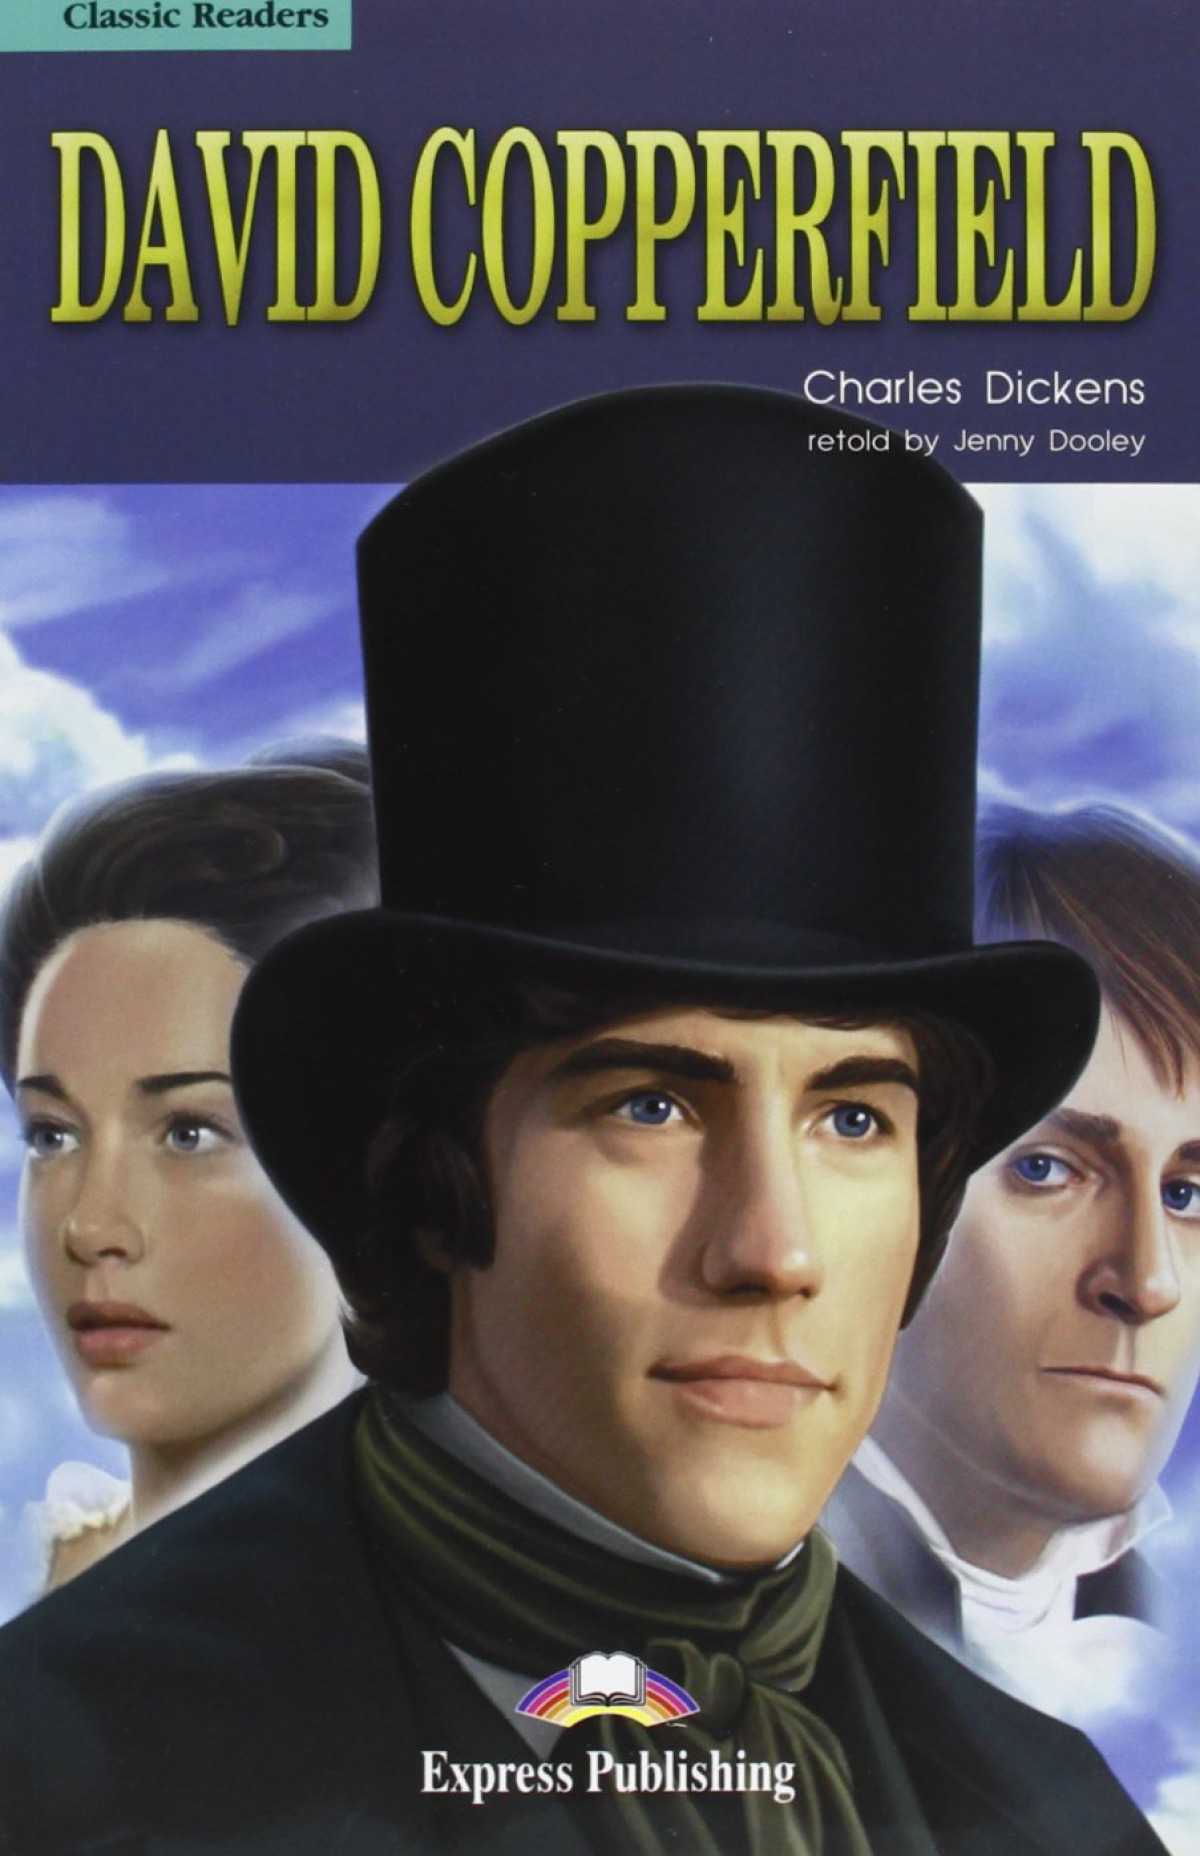 David copperfield - Dickens, Charles